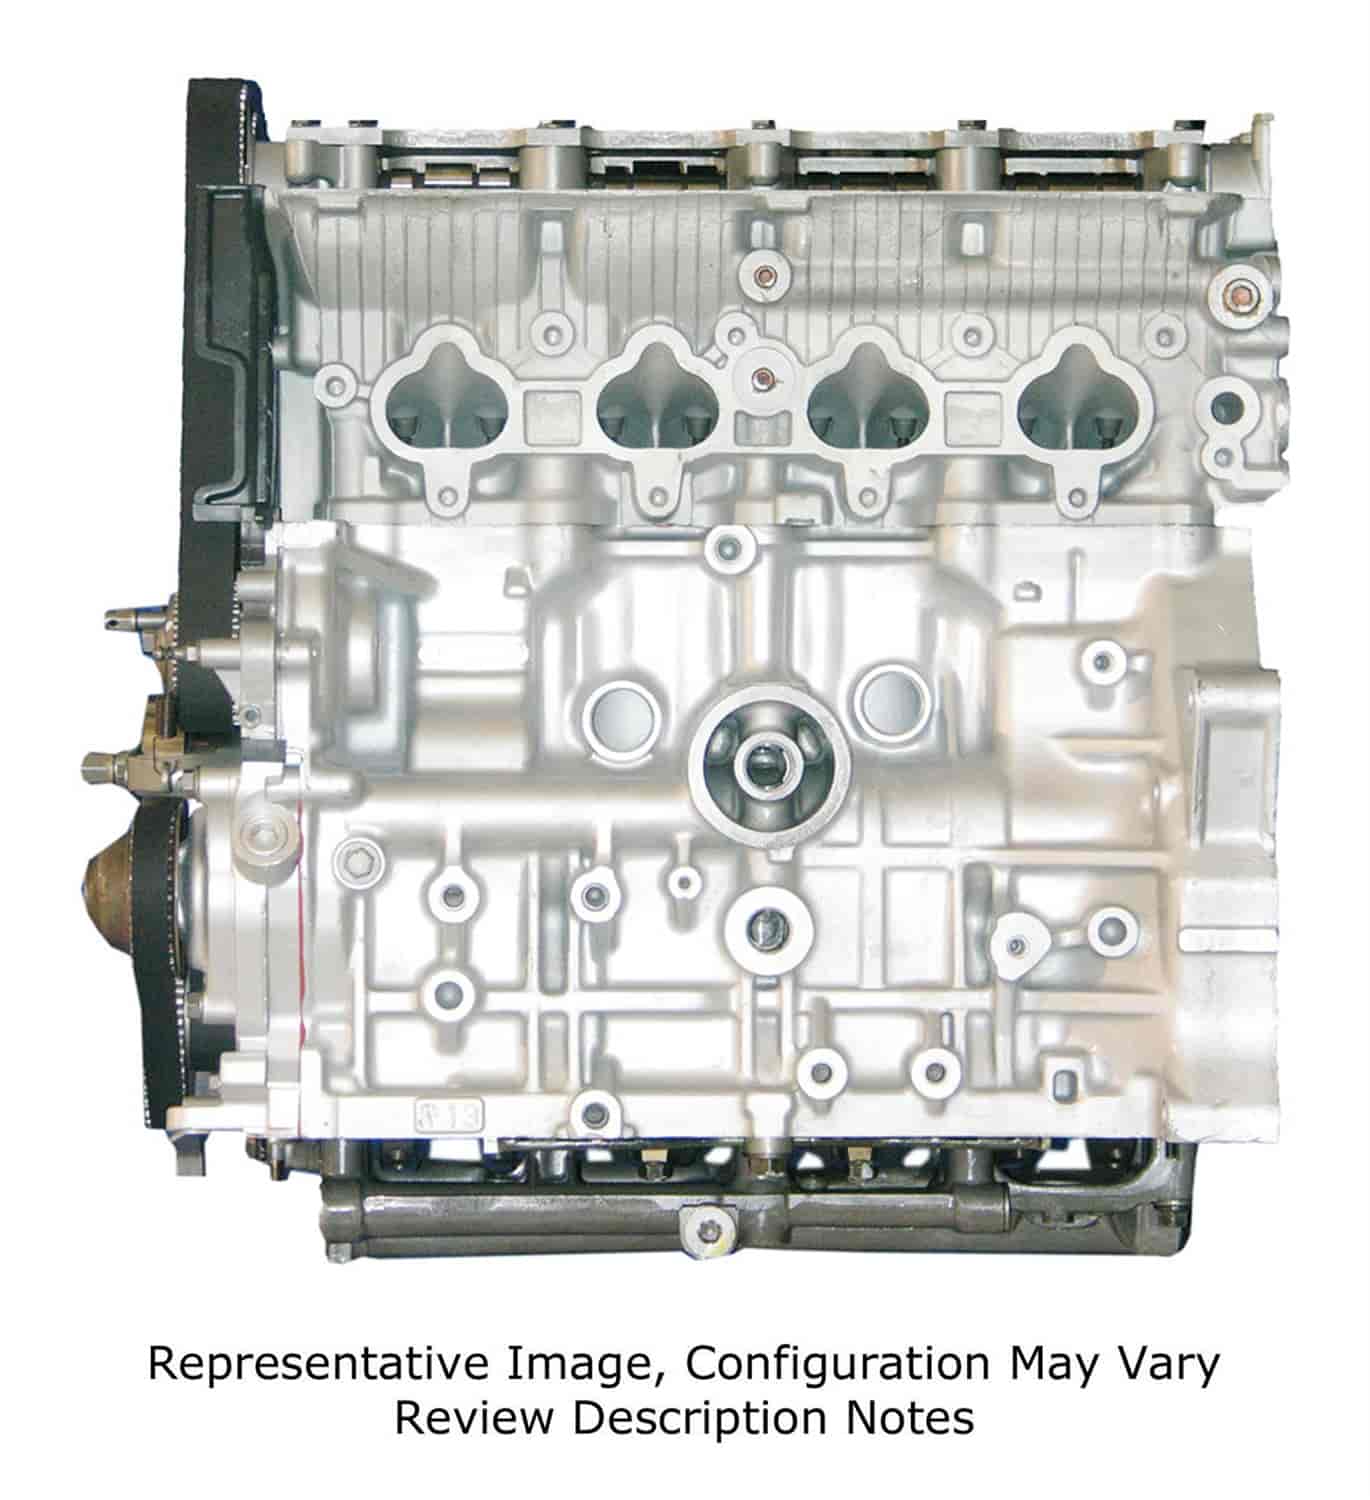 Remanufactured Crate Engine for 1996 Honda Prelude with 2.2L L4 H22A1